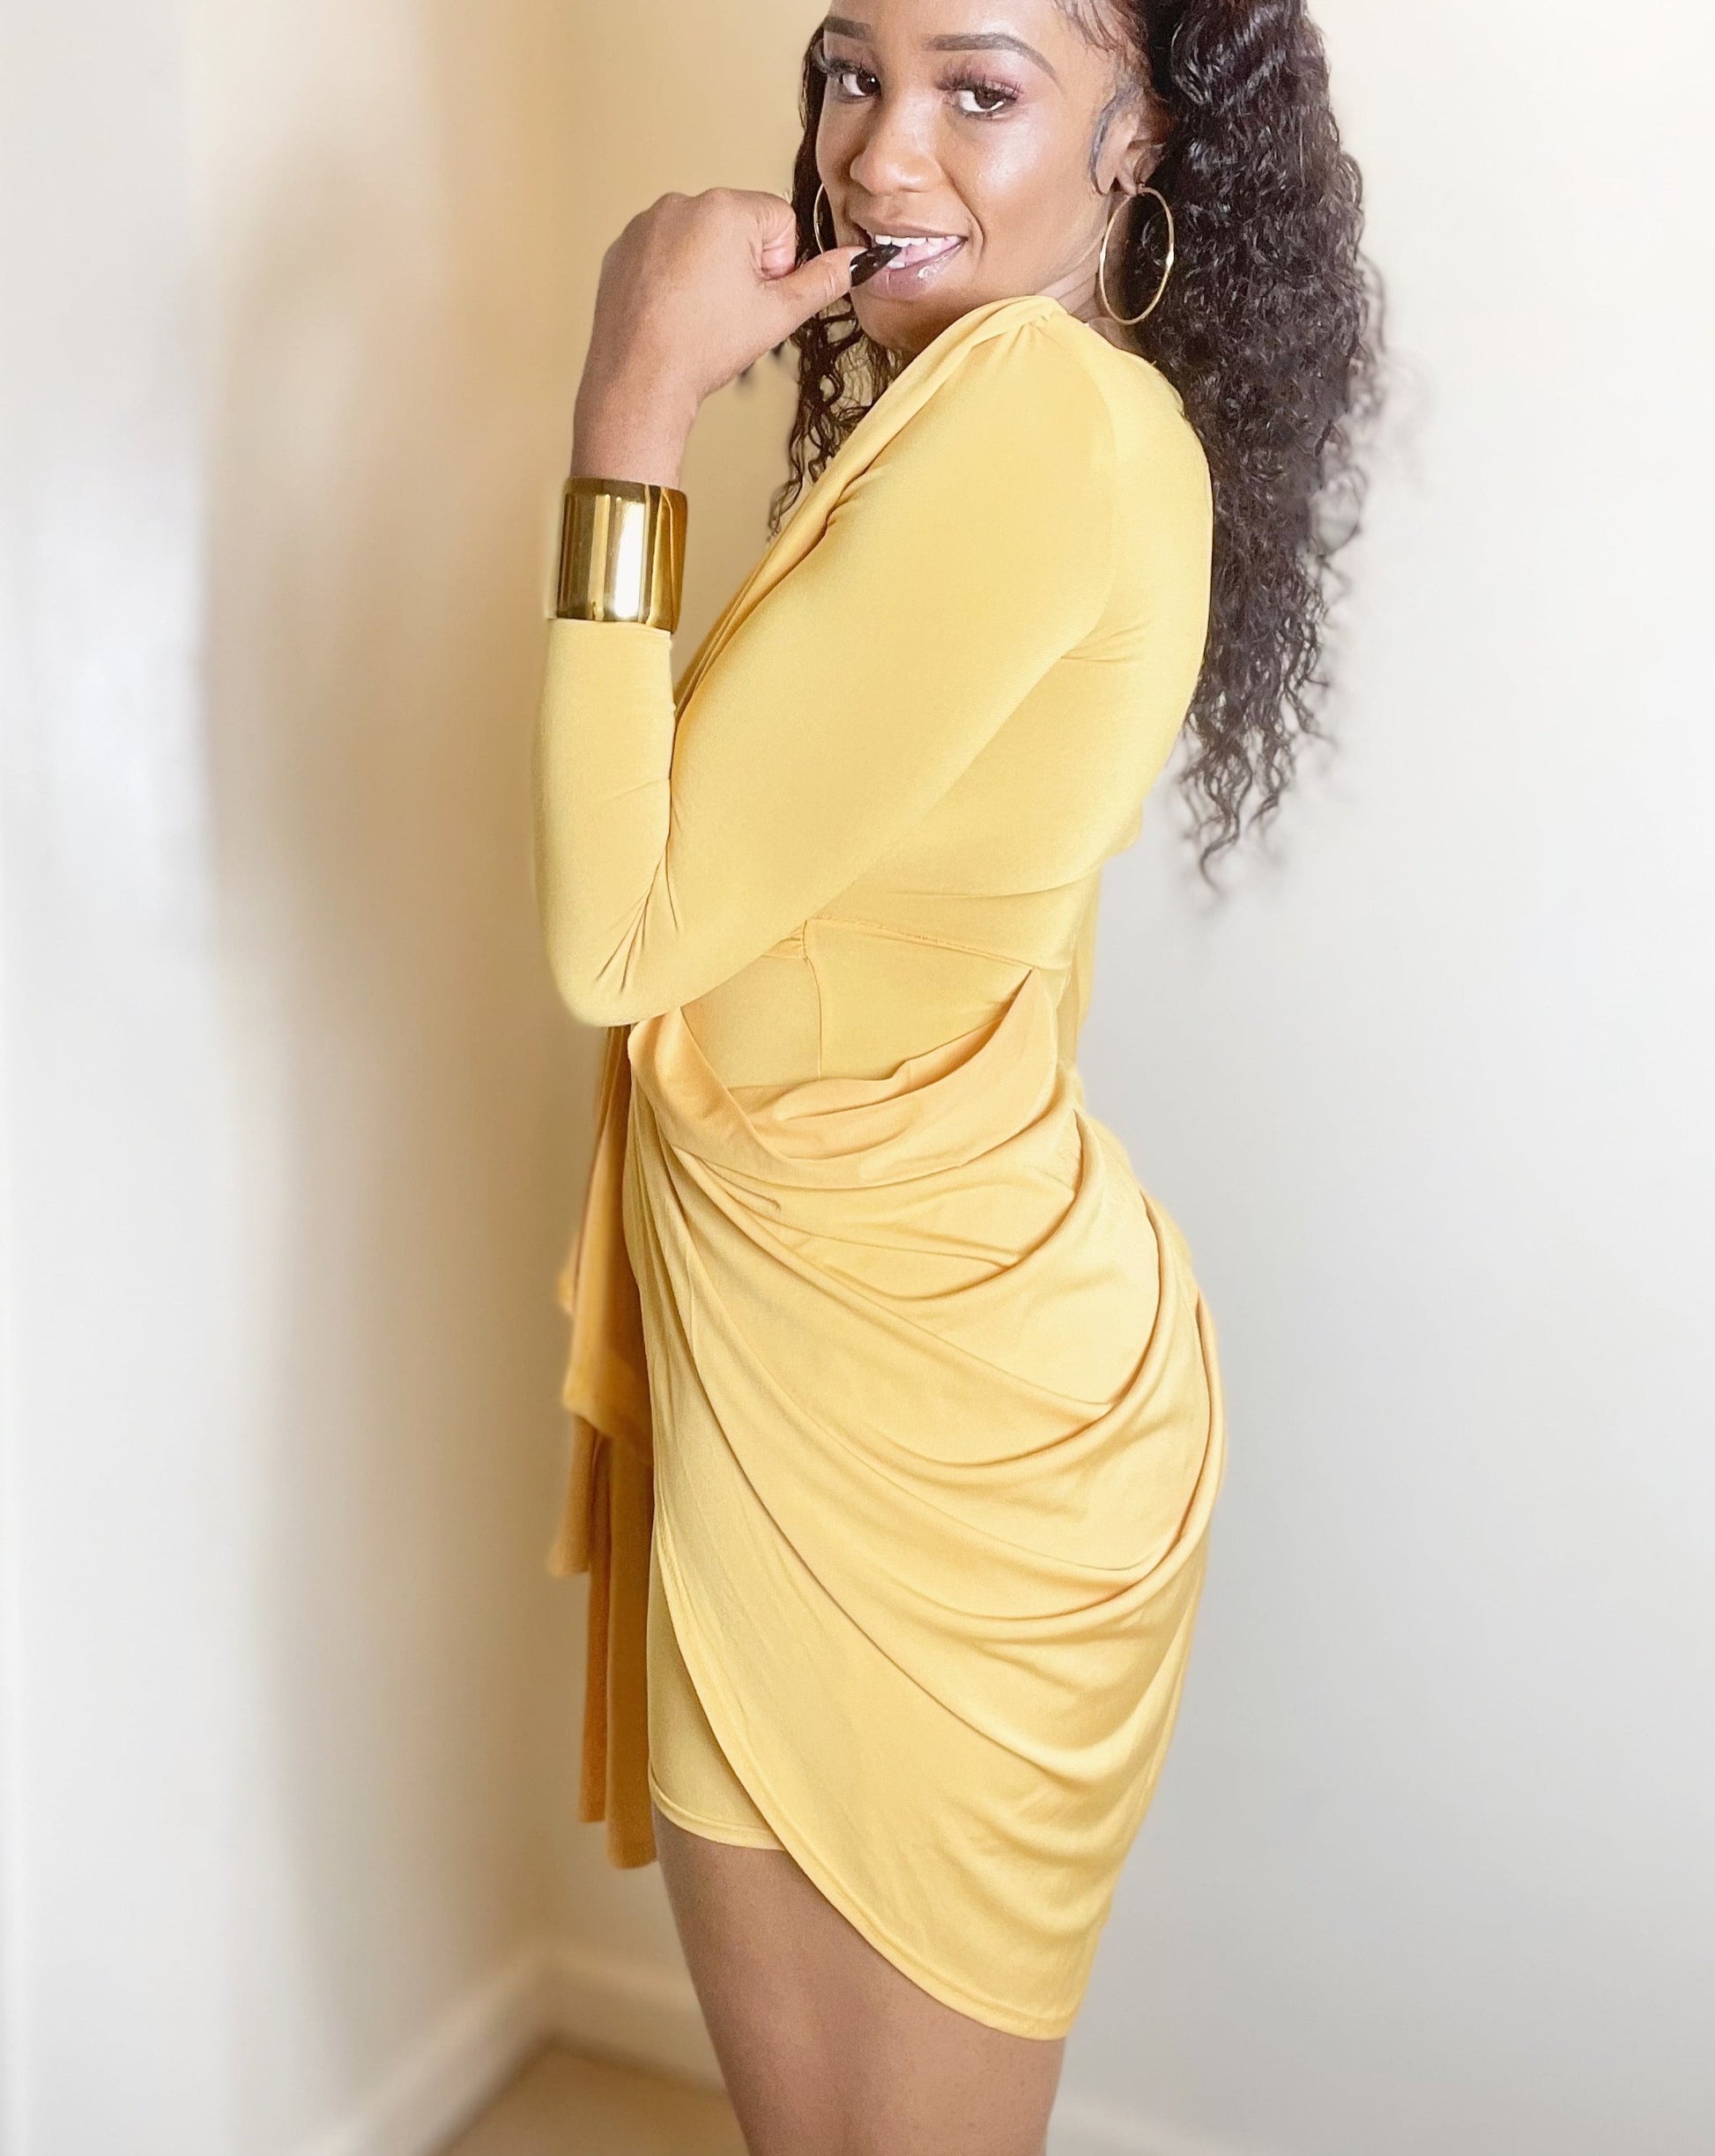 Womens Dress-Mustard Yellow-Gold Dress-Prom-Wedding-Special Occassion-BOSSED UP FASHION